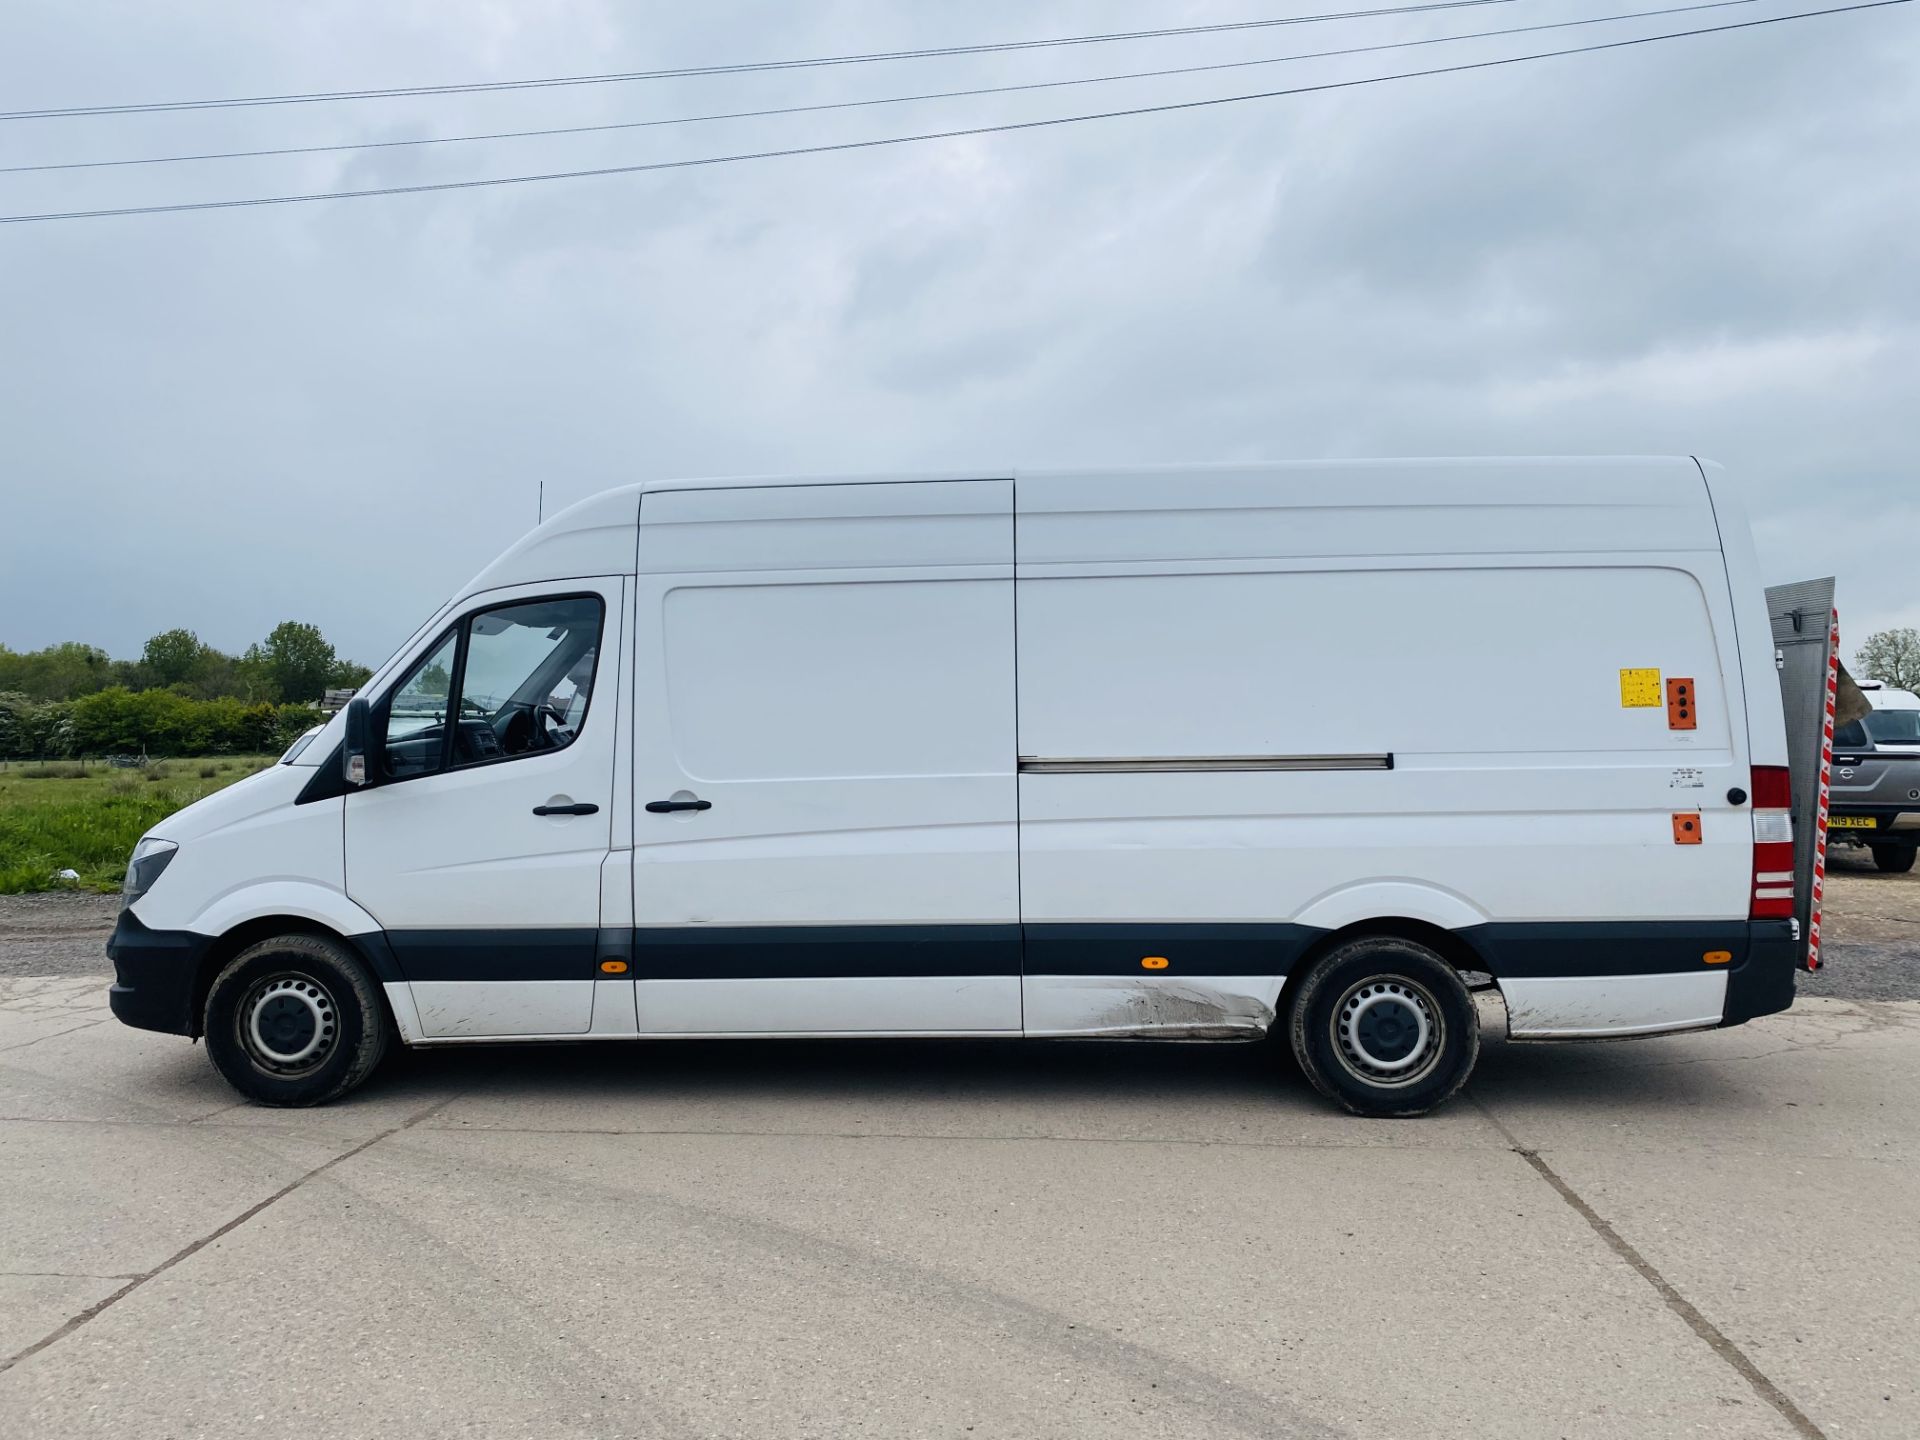 MERCEDES SPRINTER 314CDI "LWB" HIGH ROOF WITH FULL ELECTRIC TAIL-LIFT - 2018 MODEL - 1 OWNER - FSH - Image 4 of 18